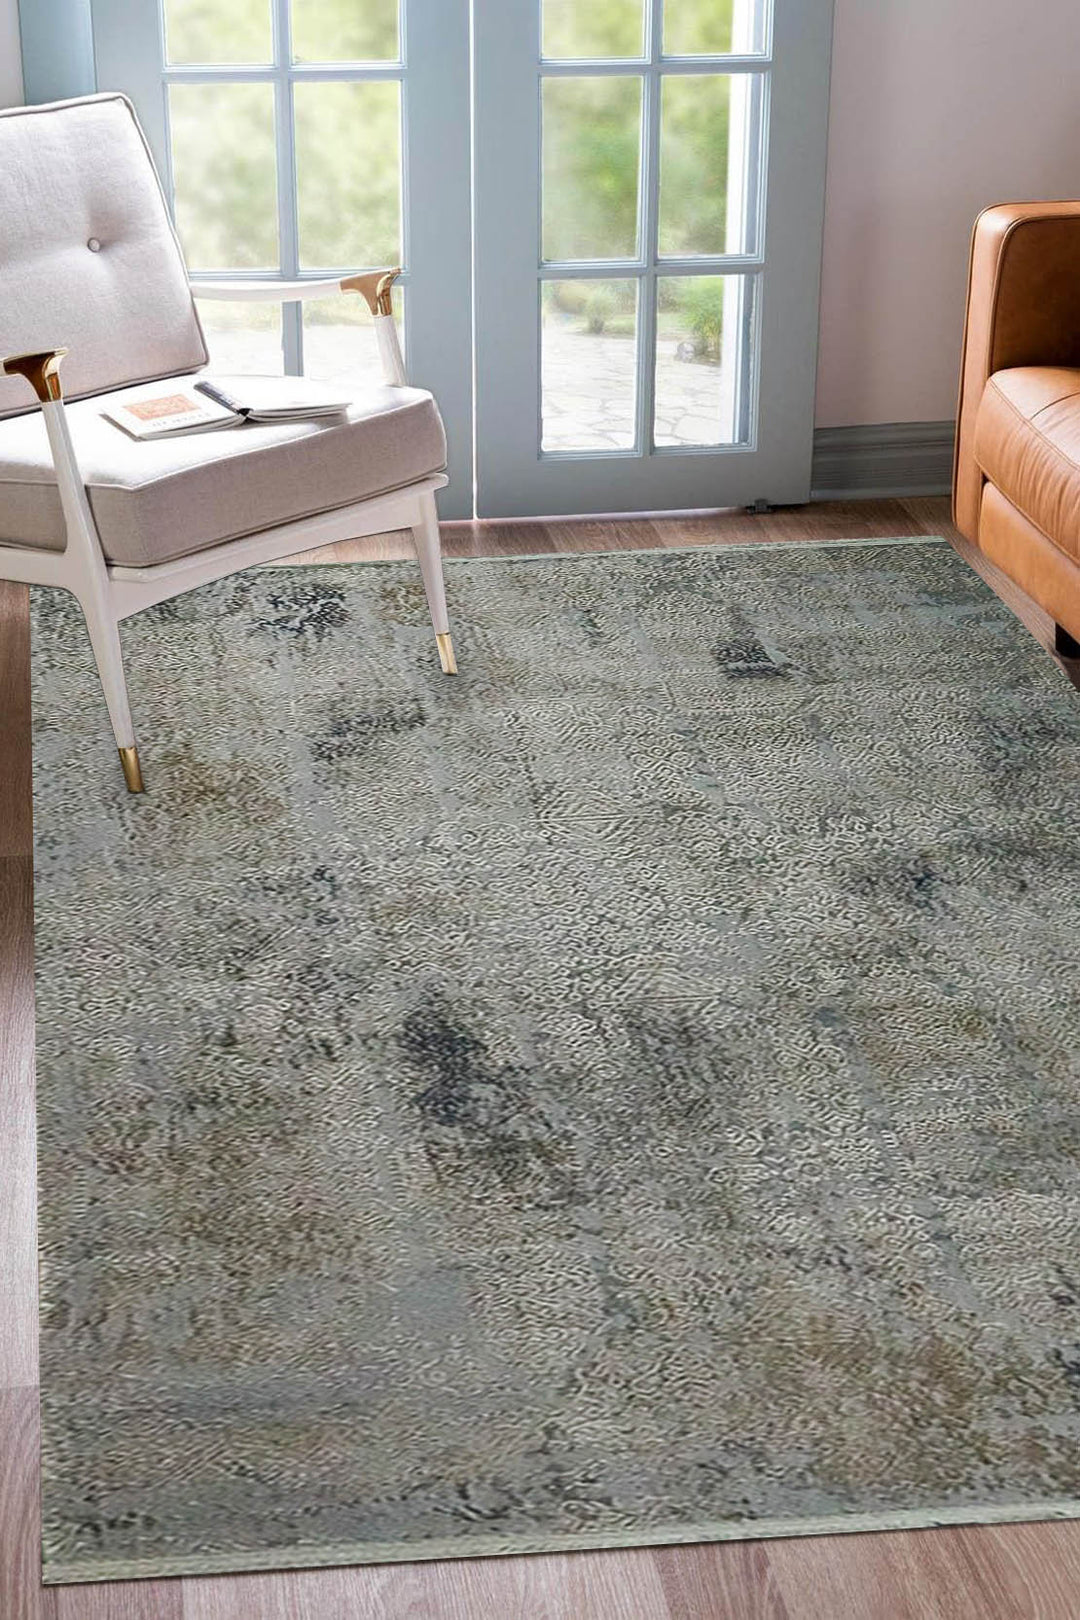 Premium Quality Turkish Borego Rug - 4.92 x 7.38 FT - Blue - Resilient Construction for Long-Lasting Use - V Surfaces